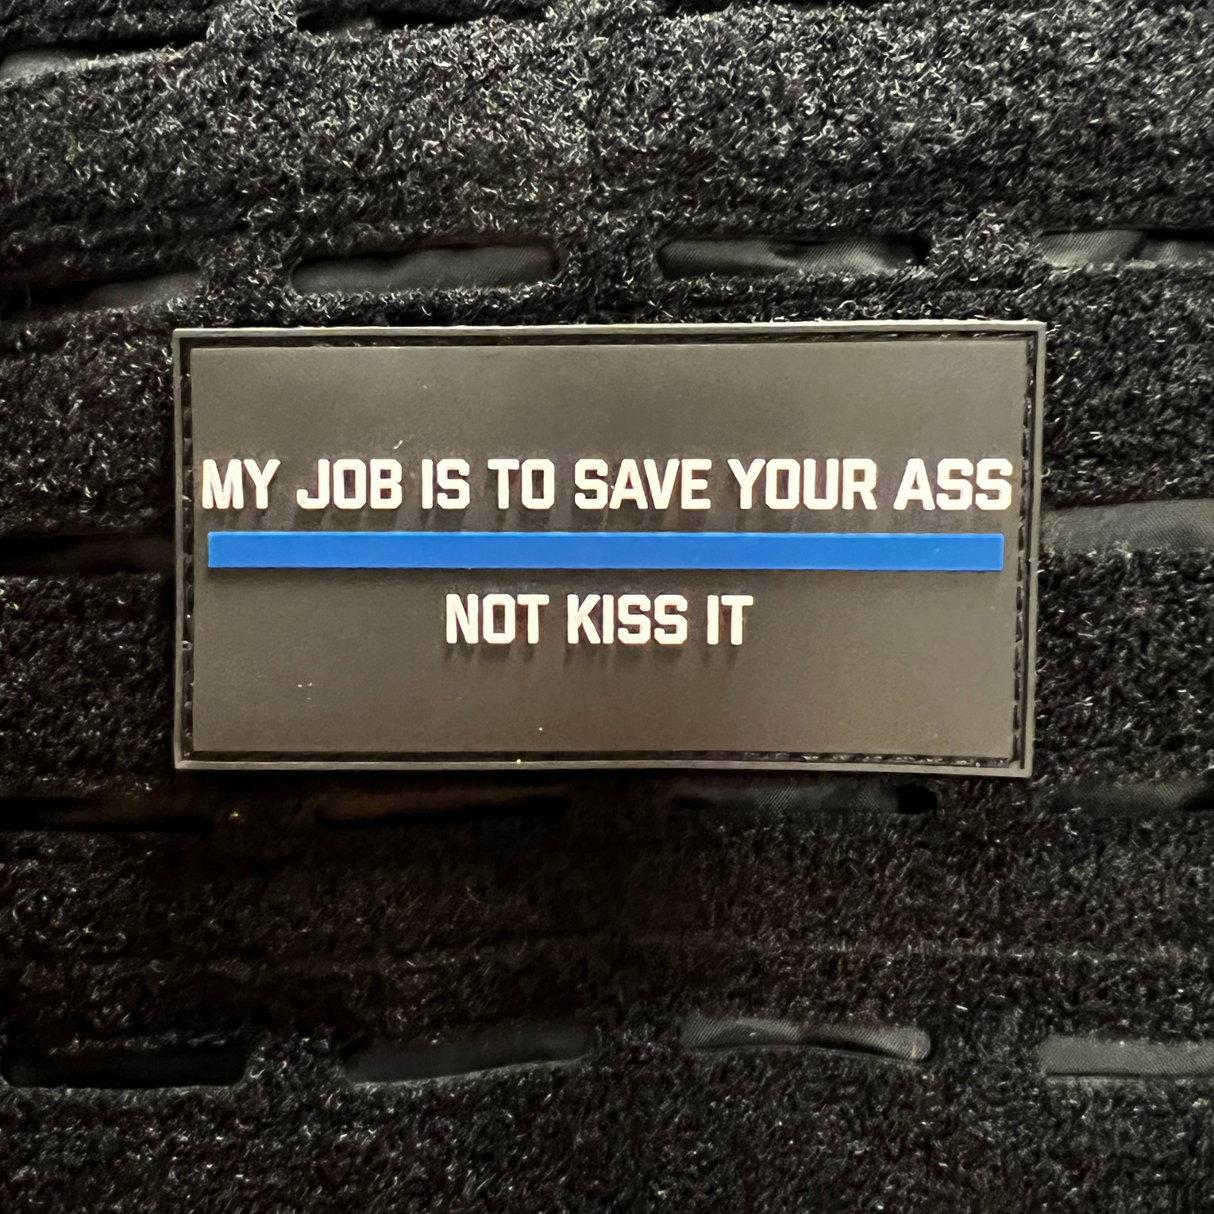 MY JOB IS TO SAVE YOUR ASS Rubberpatch